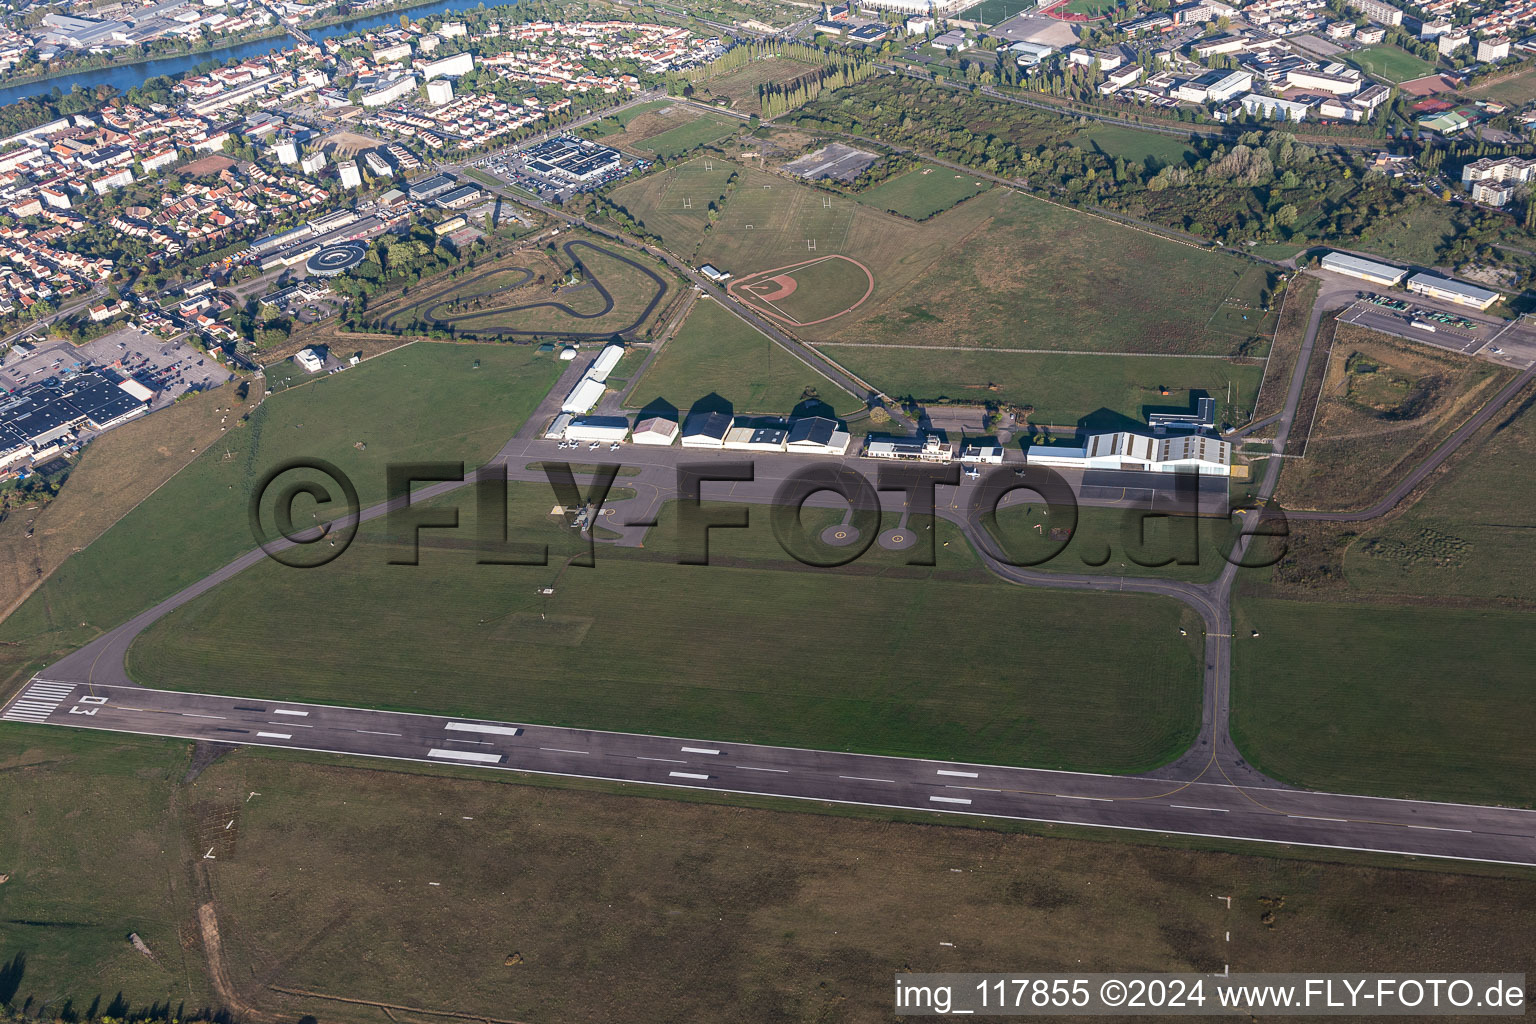 Runway with hangar taxiways and terminals on the grounds of the airport Aeroport de Nancy-Essey in Tomblaine in Grand Est, France